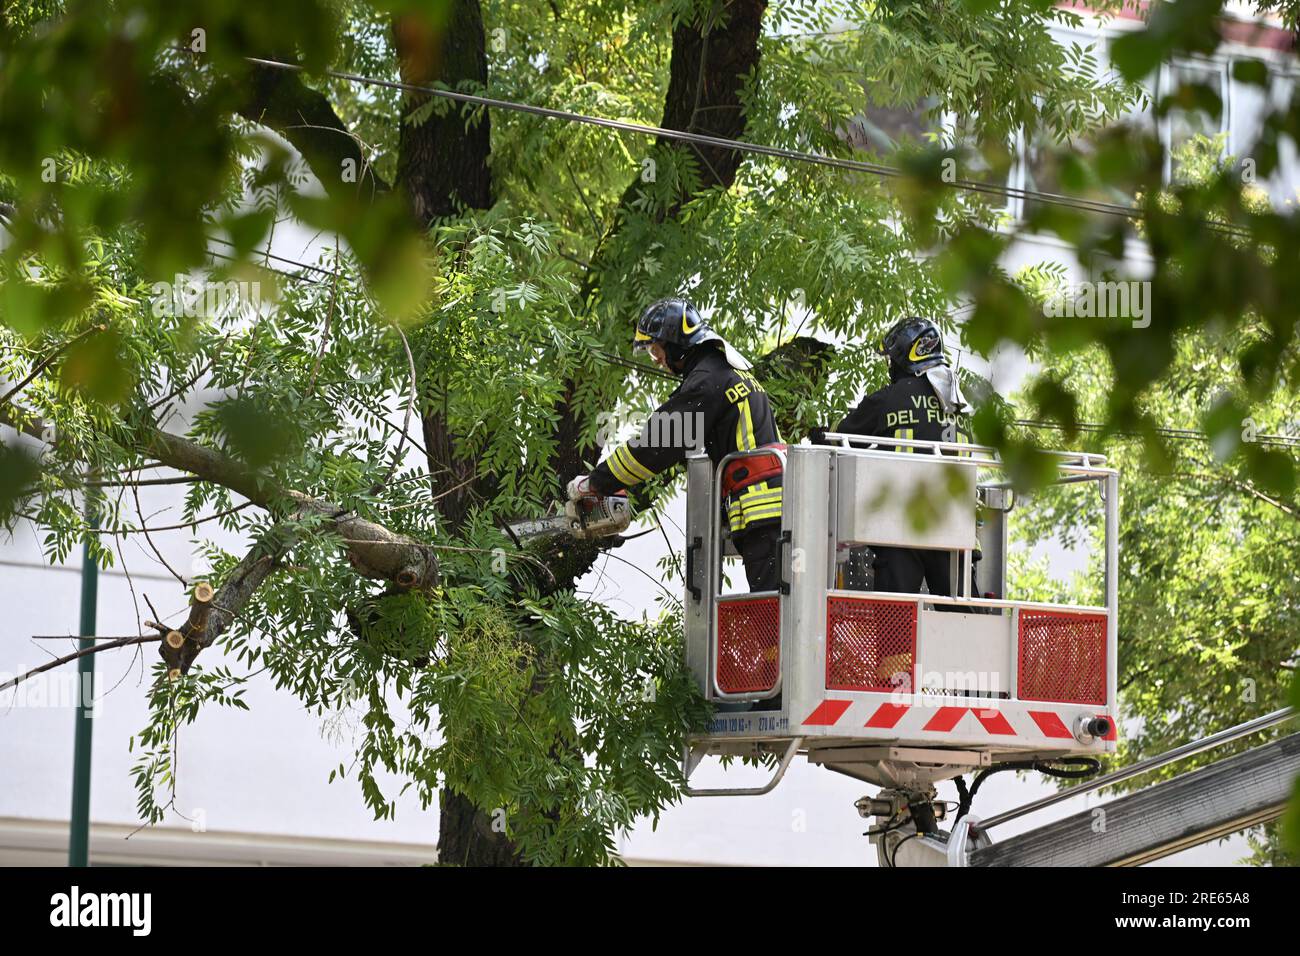 Milan, Italy. 25th July, 2023. Firefighters remove a broken branch after thunderstorms in Milan, Italy, on July 25, 2023. While the southern two-thirds of Italy struggled under the oppressive heat, most of the northern area was pelted by thunderstorms and over-sized hail. Media reports said the emergency services in Milan had responded to more than 200 requests for help related to flooding, fallen trees, and damage to cars and homes, since a severe storm hit the city late Monday. Credit: Str/Xinhua/Alamy Live News Stock Photo